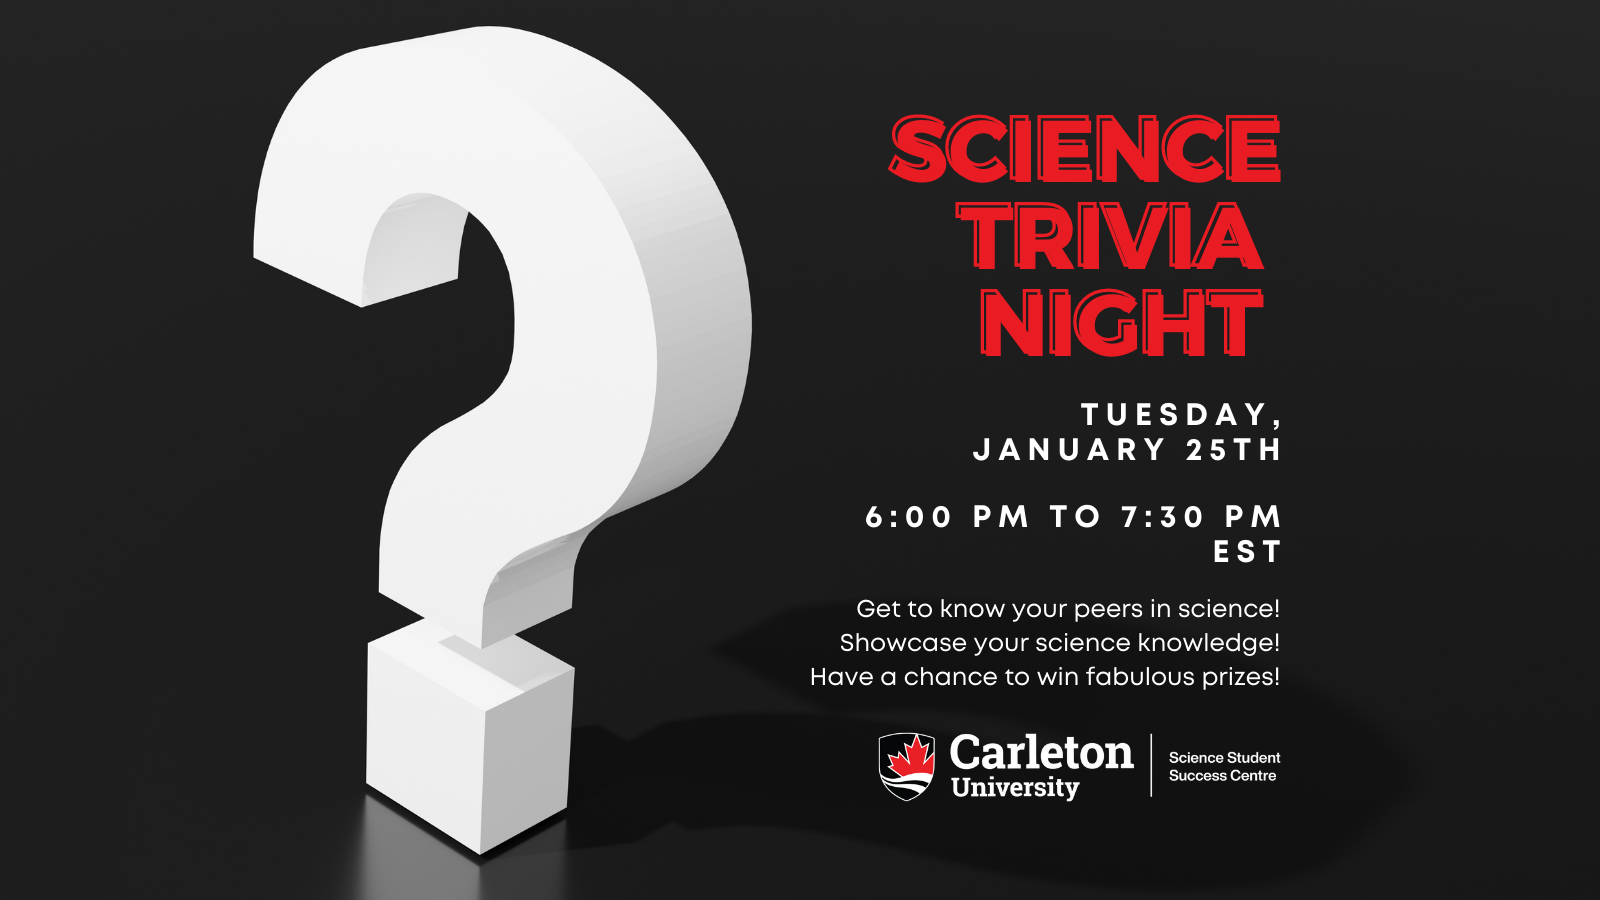 Poster with text. Image is of a large question mark. The text reads “Science Trivia Night. Tuesday, January 25th, 6:00 pm to 7:30pm EST. Get to know your peers in science! Showcase your science knowledge! Have a chance to win fabulous prizes! Carleton University, Science Student Success Centre” 